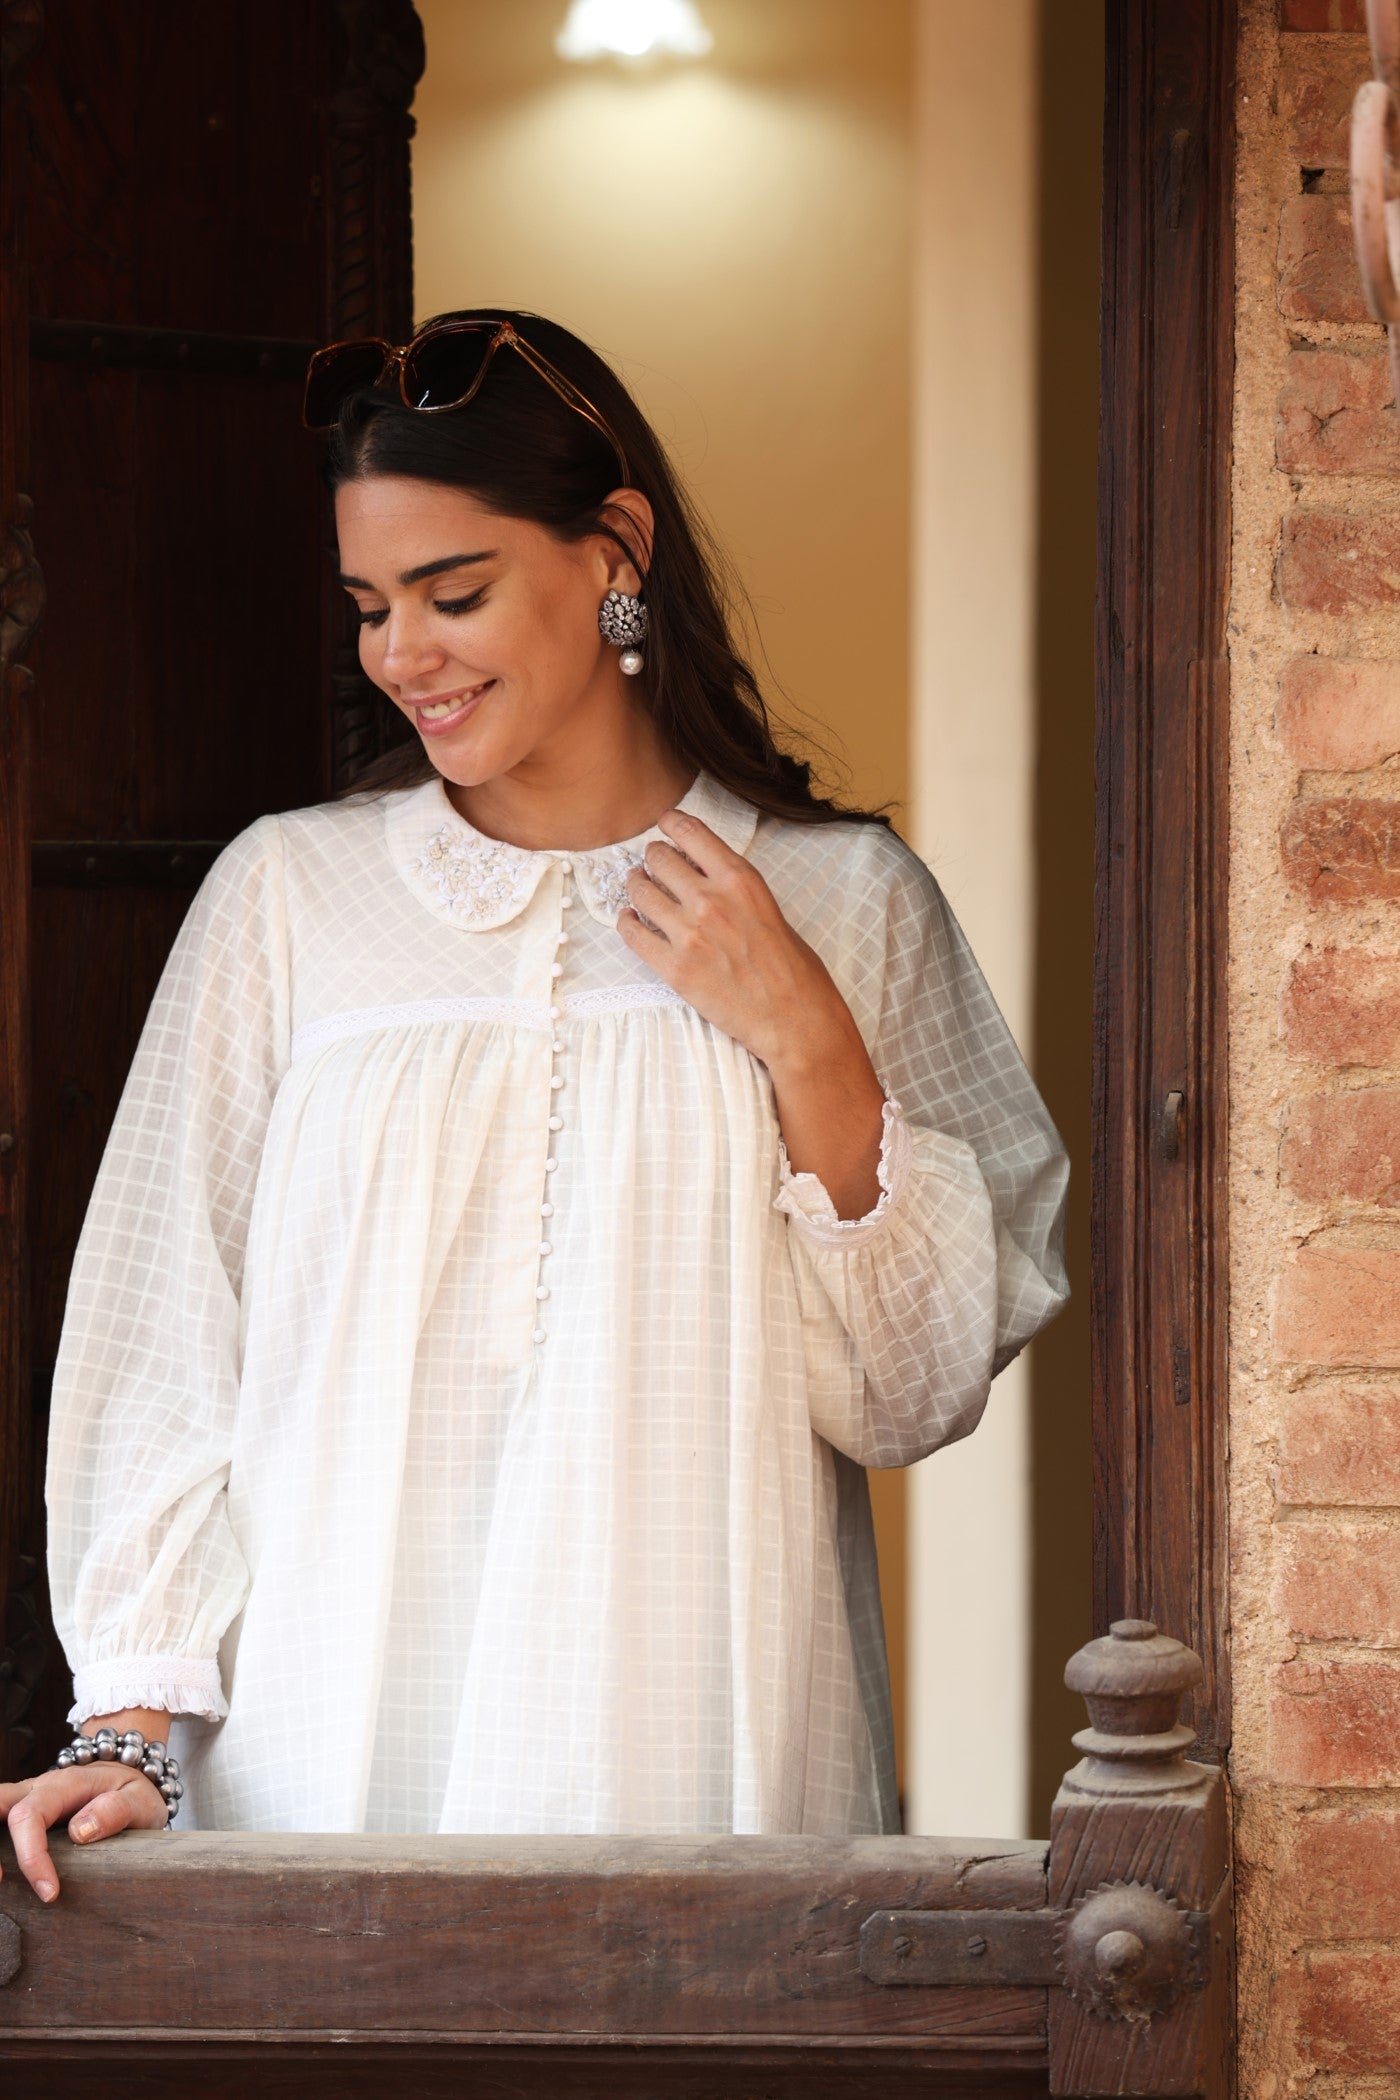 Off-White Handloom Pure Cotton Checks Short-Blouse With Front Gathers And Hand-Embroidered Collars